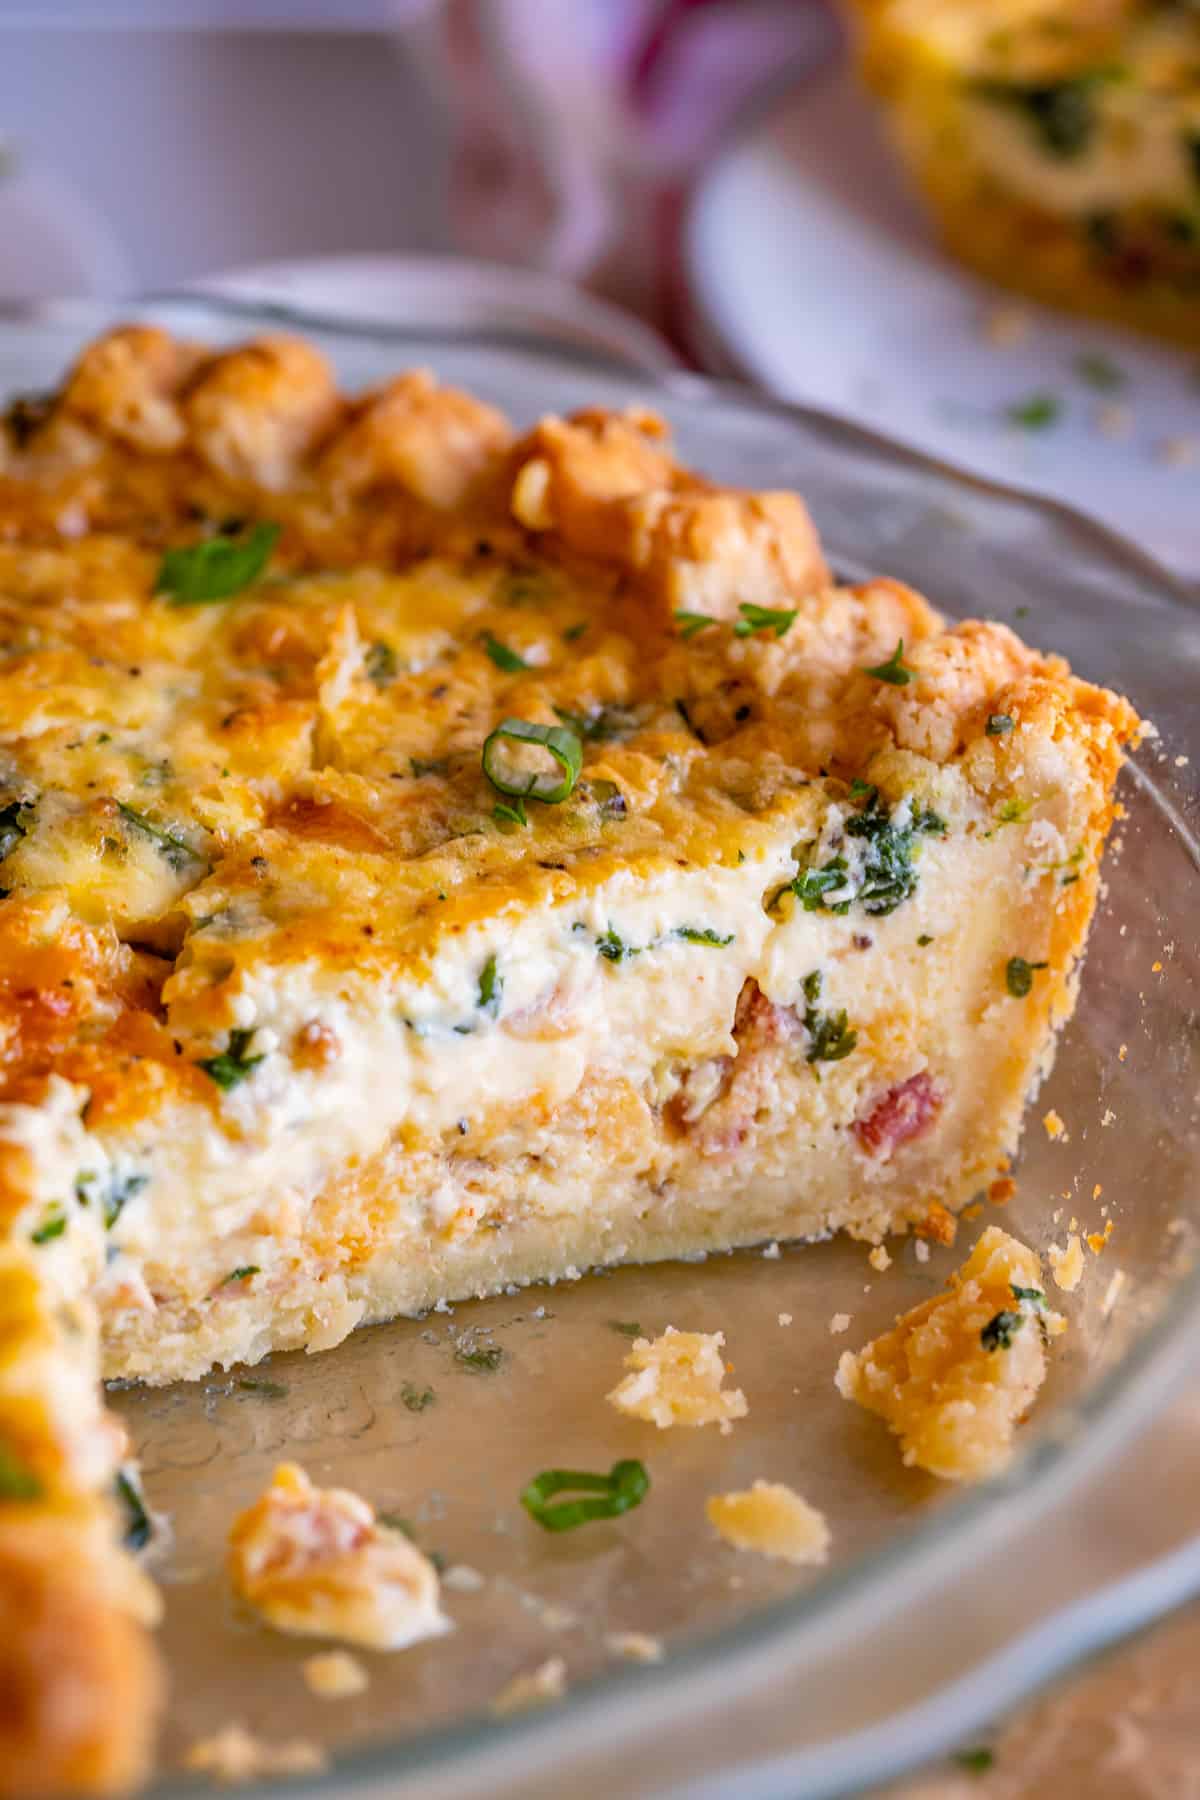 Best Quiche Recipe for Breakfast - The Food Charlatan